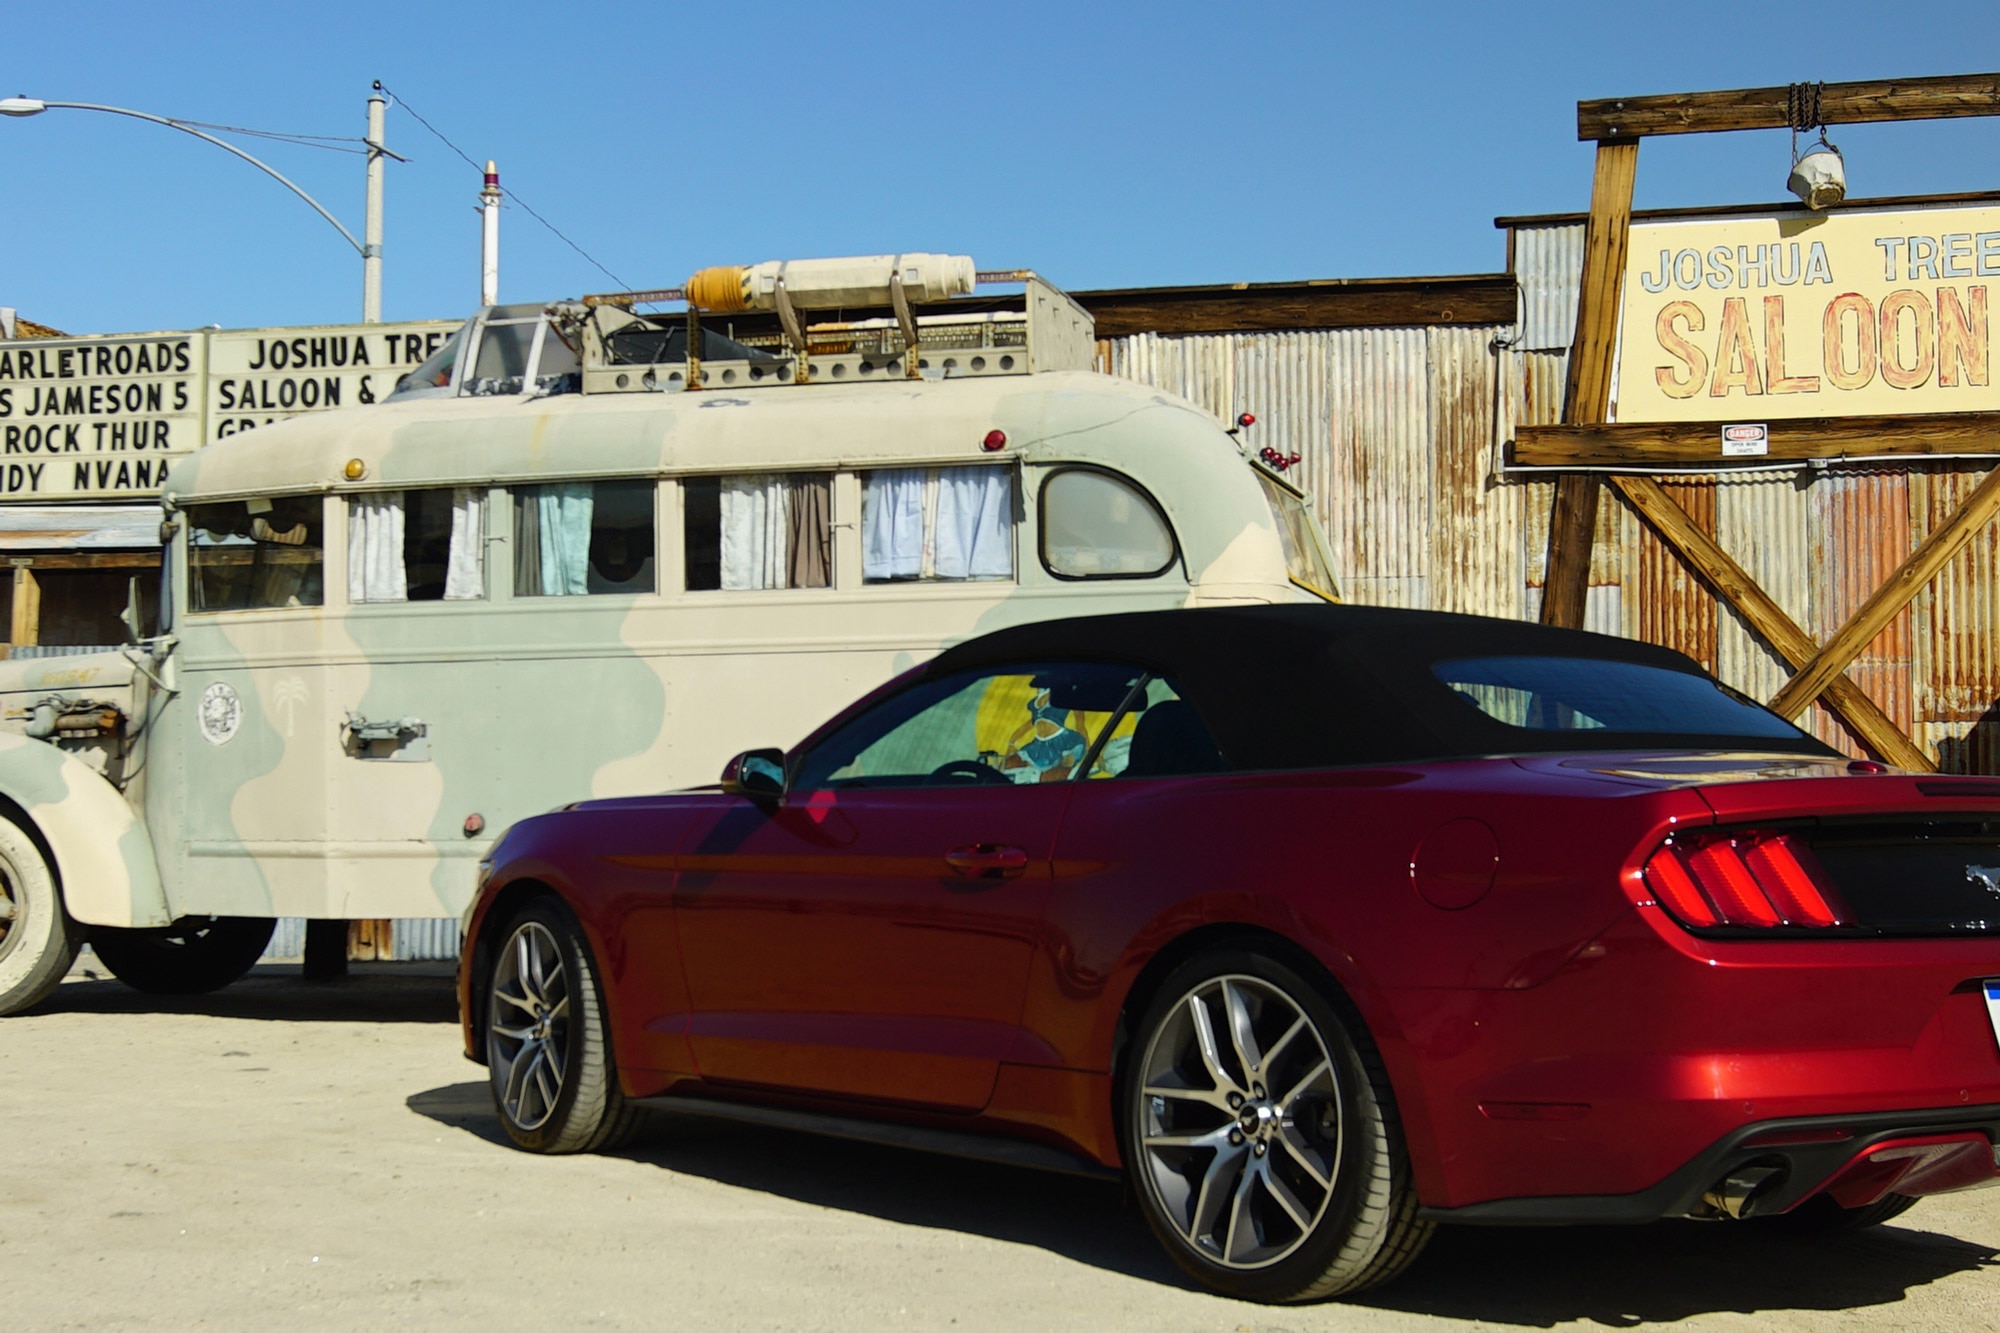 Red 2015 Ford Mustang convertible parked in Joshua Tree, California